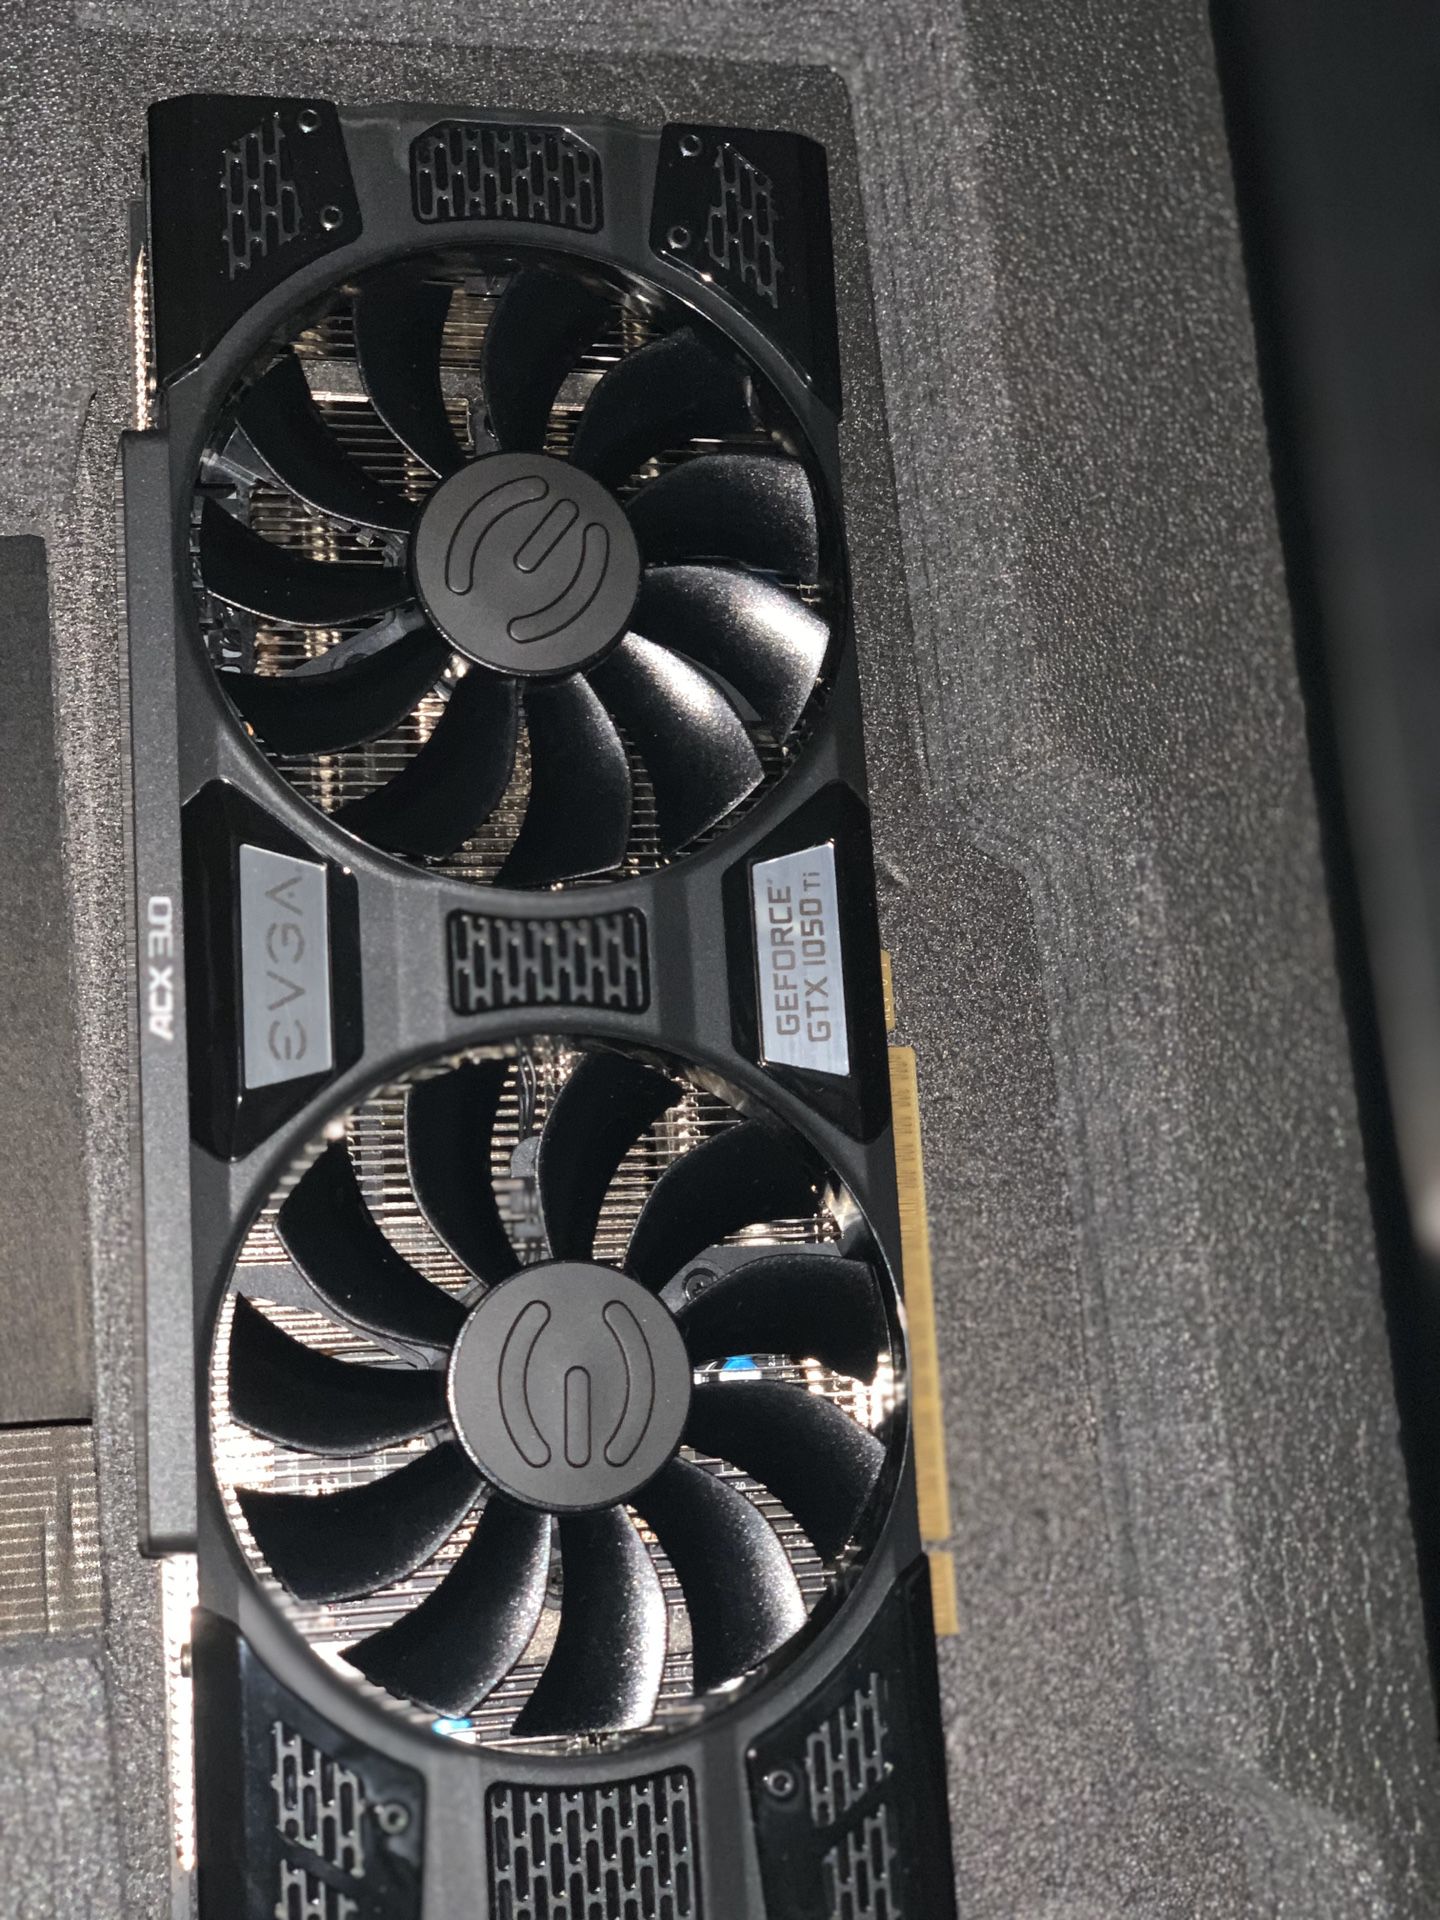 GTX 1050ti graphic card opened never used.